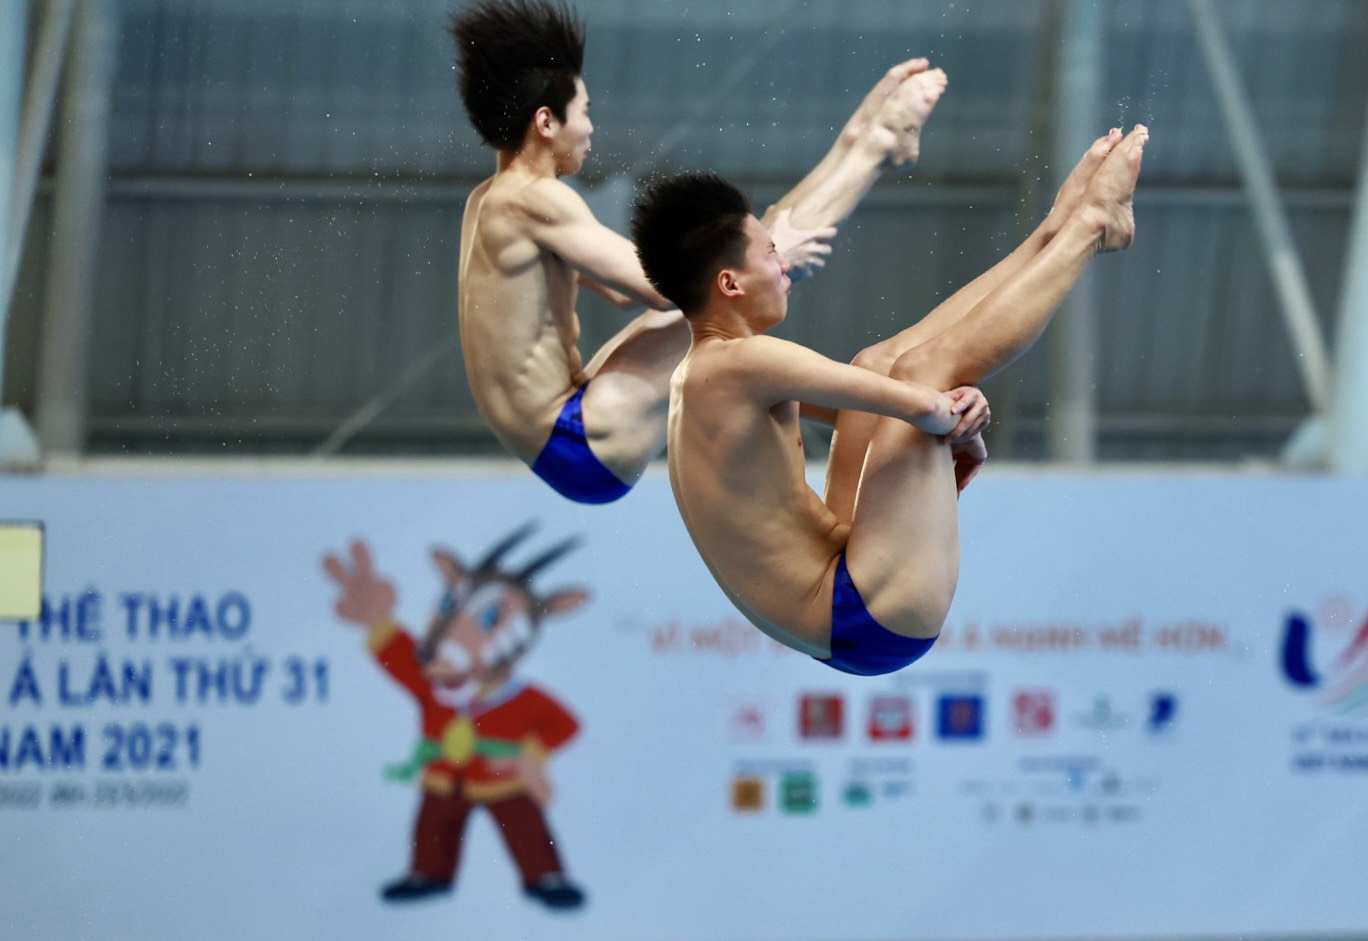 Vietnam’s divers Nguyen Tung Duong and Phuong The Anh compete in men’s three-meter synchro at the 2021 Southeast Asian (SEA) Games at the My Dinh Water Sports Stadium in Hanoi, May 8, 2022. Photo: Nguyen Khanh / Tuoi Tre